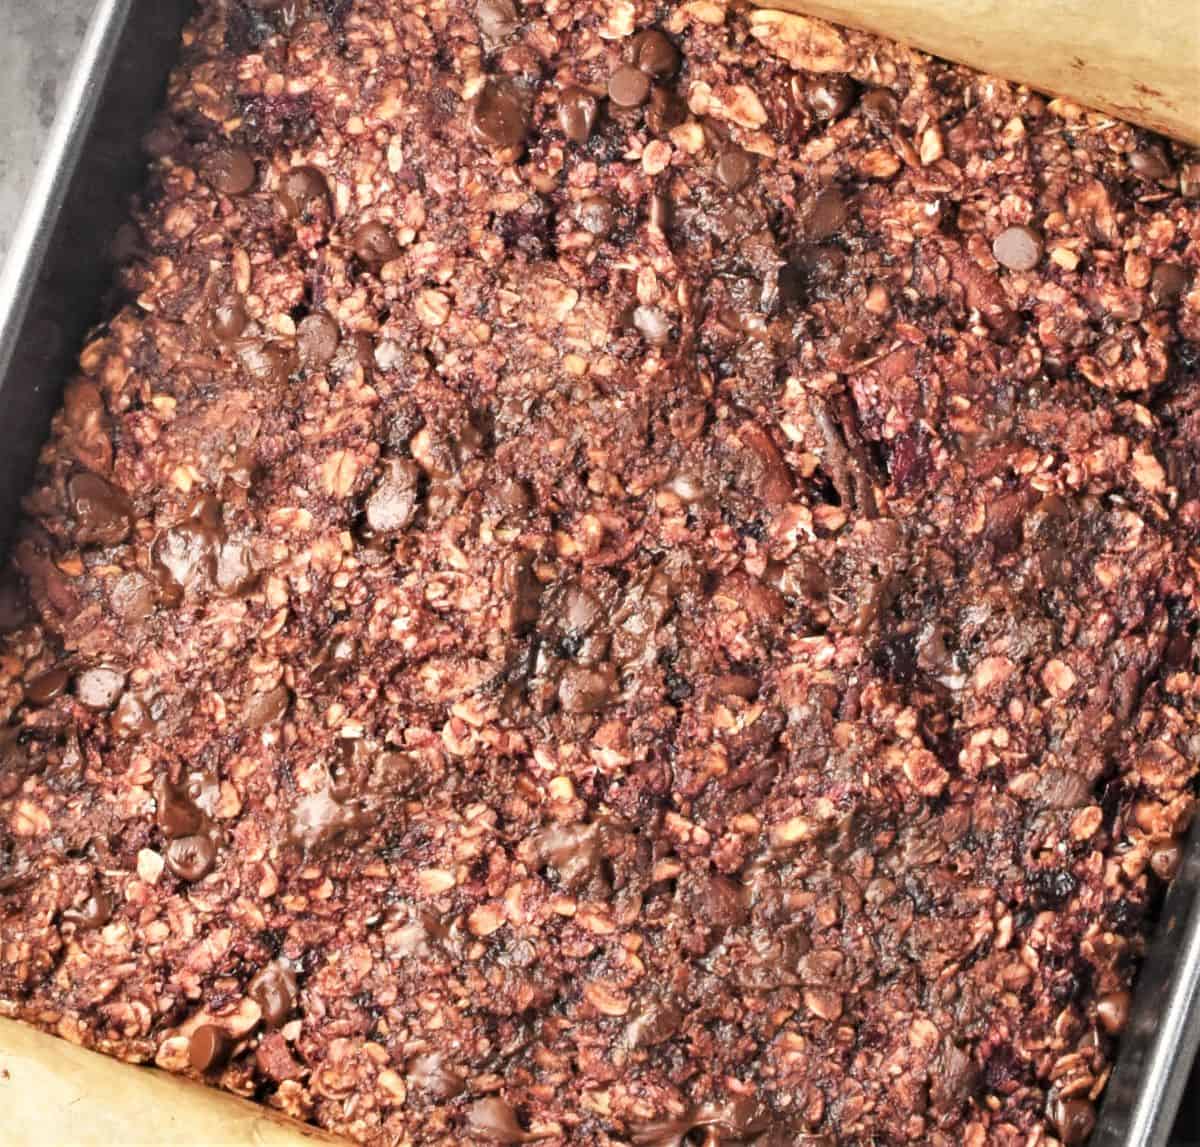 Top down view of blackberry oat bar bake in square pan.